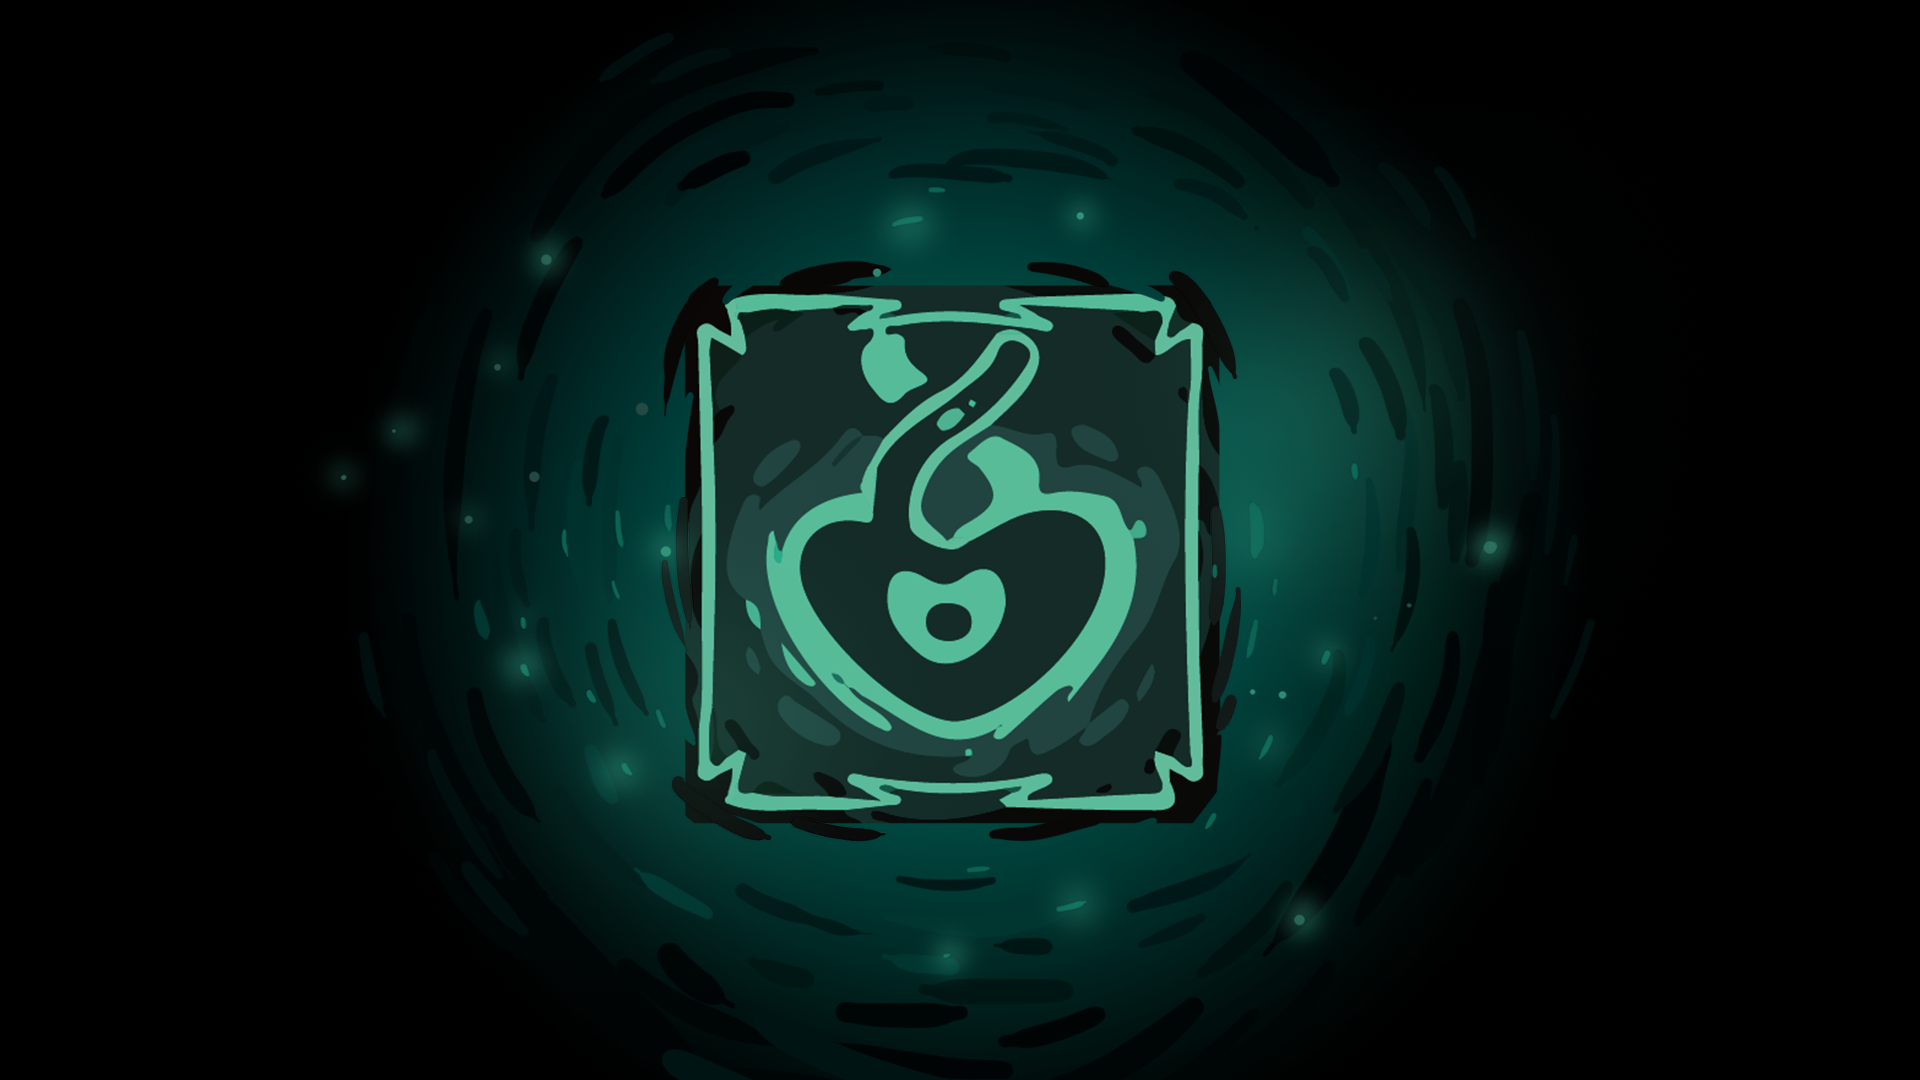 Icon for Heart of the Ocean